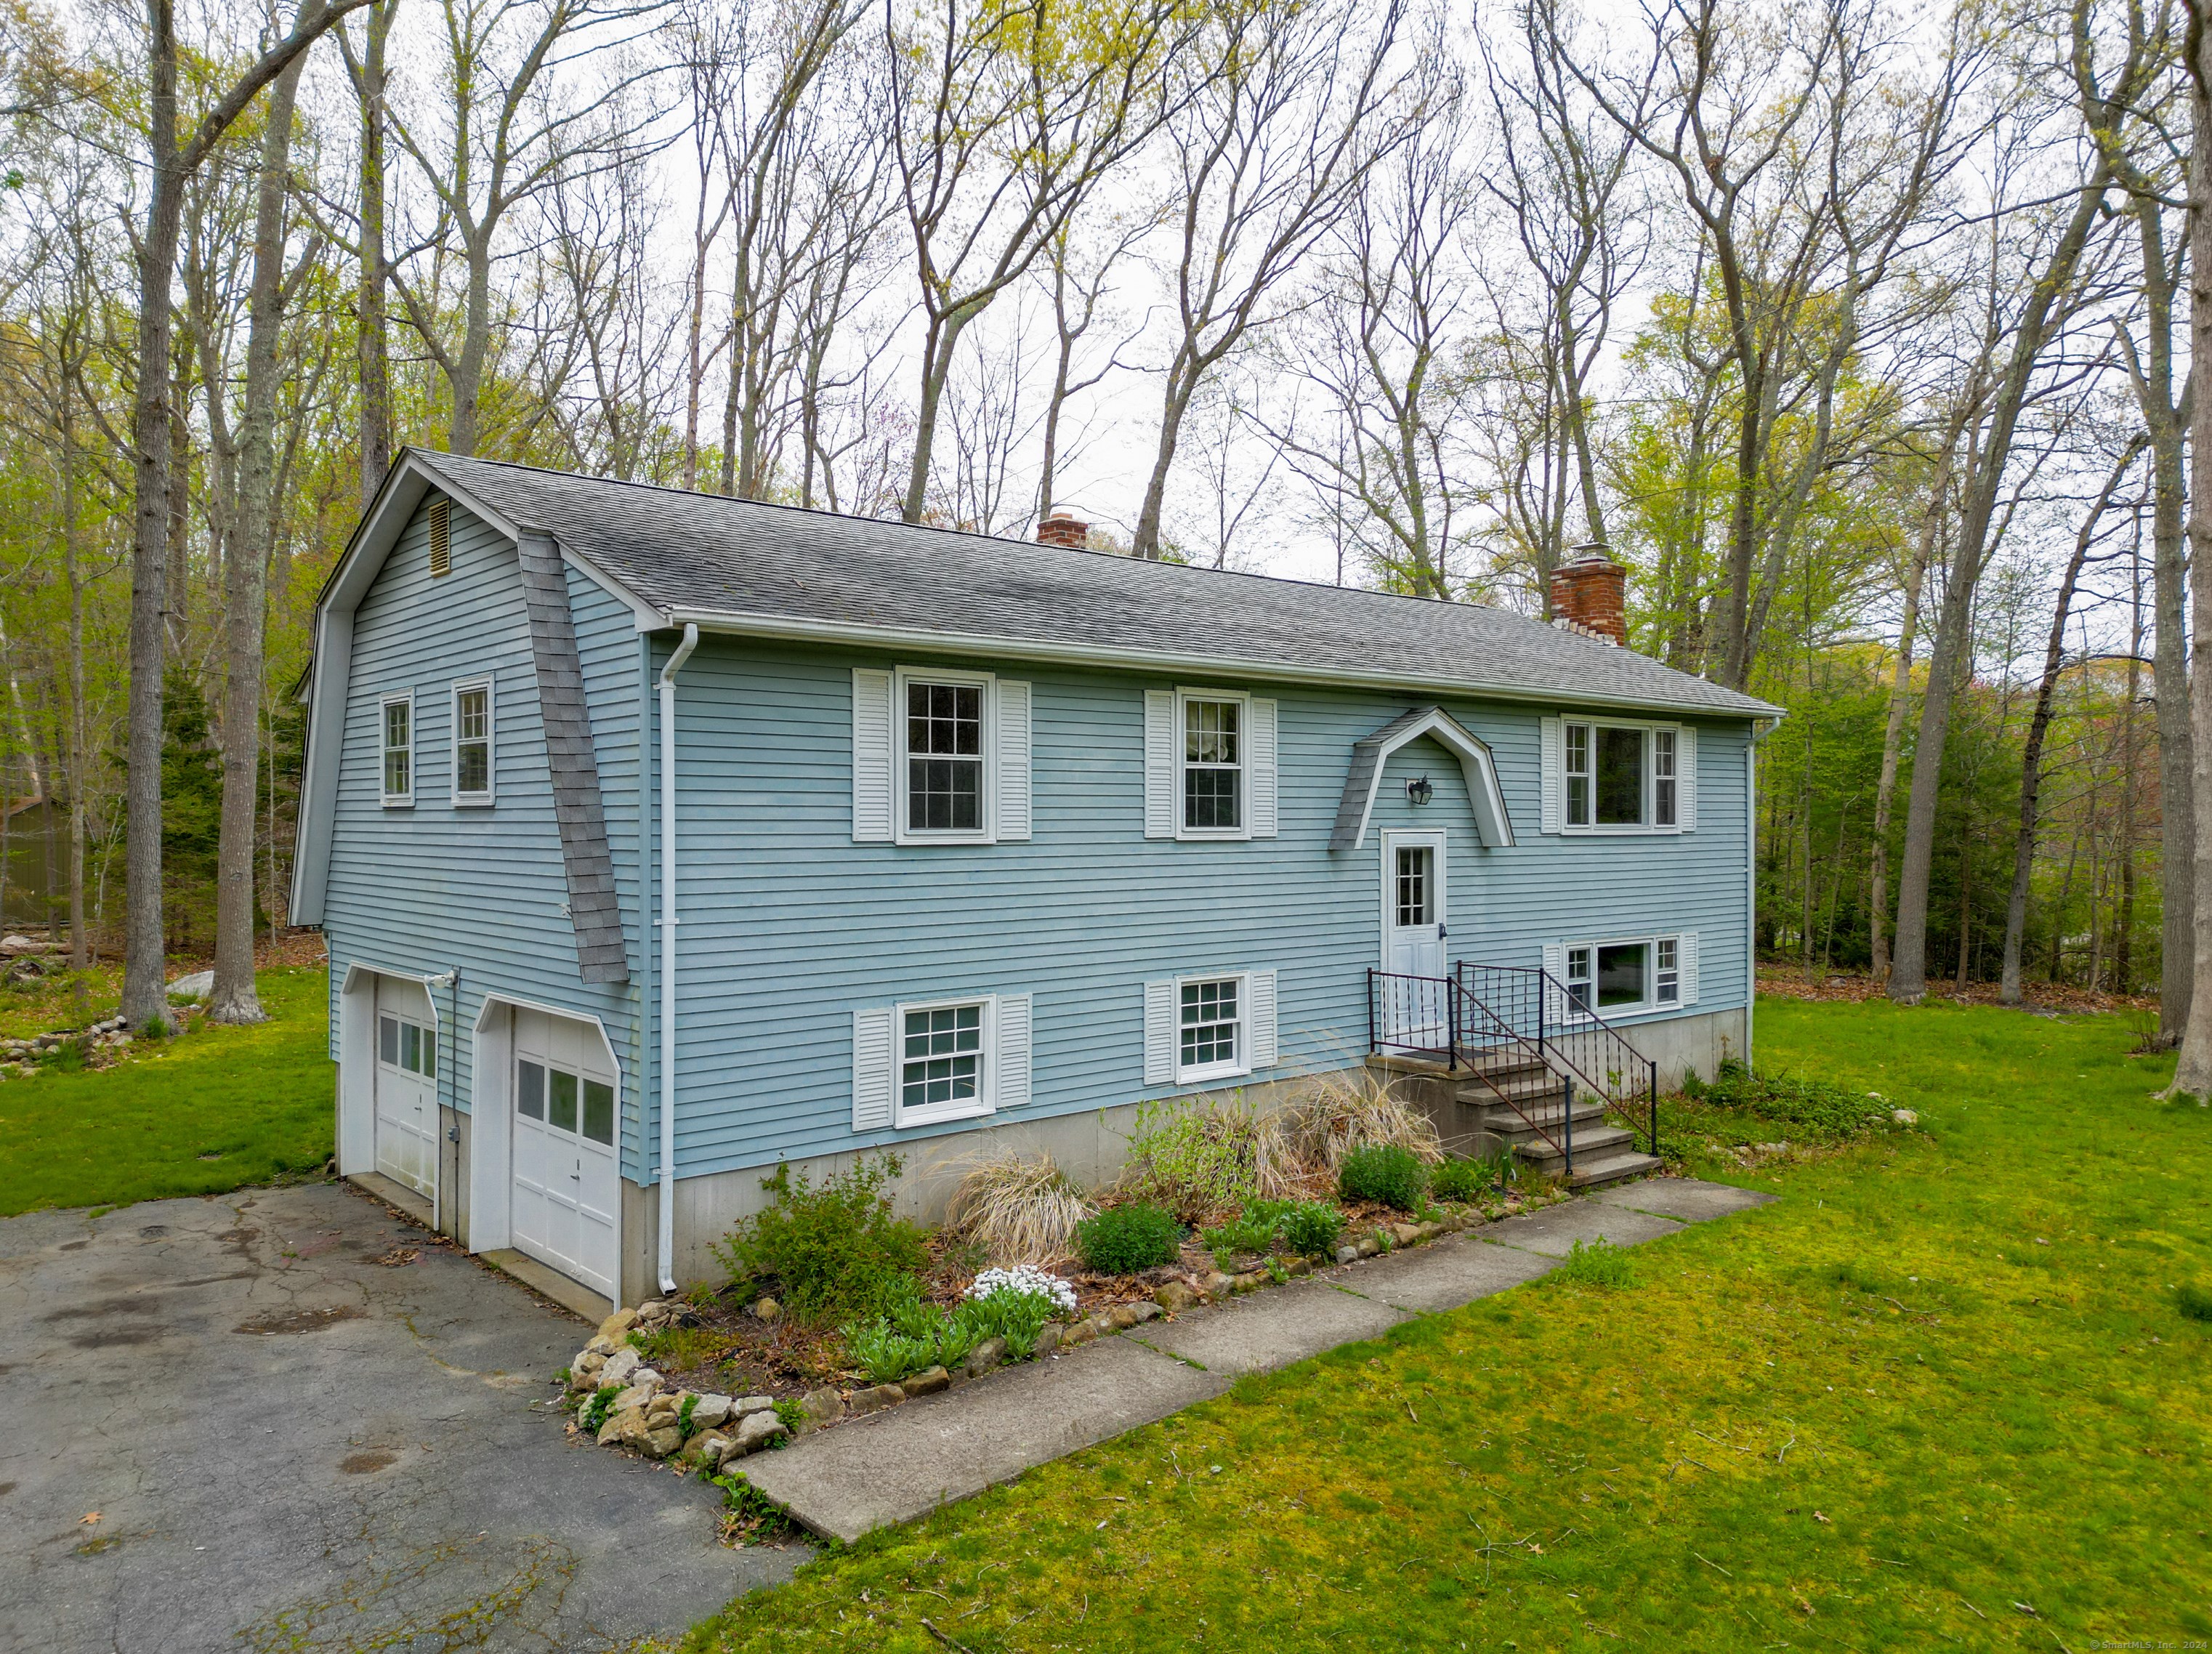 11 Warbler Way, Gales Ferry, CT 06335